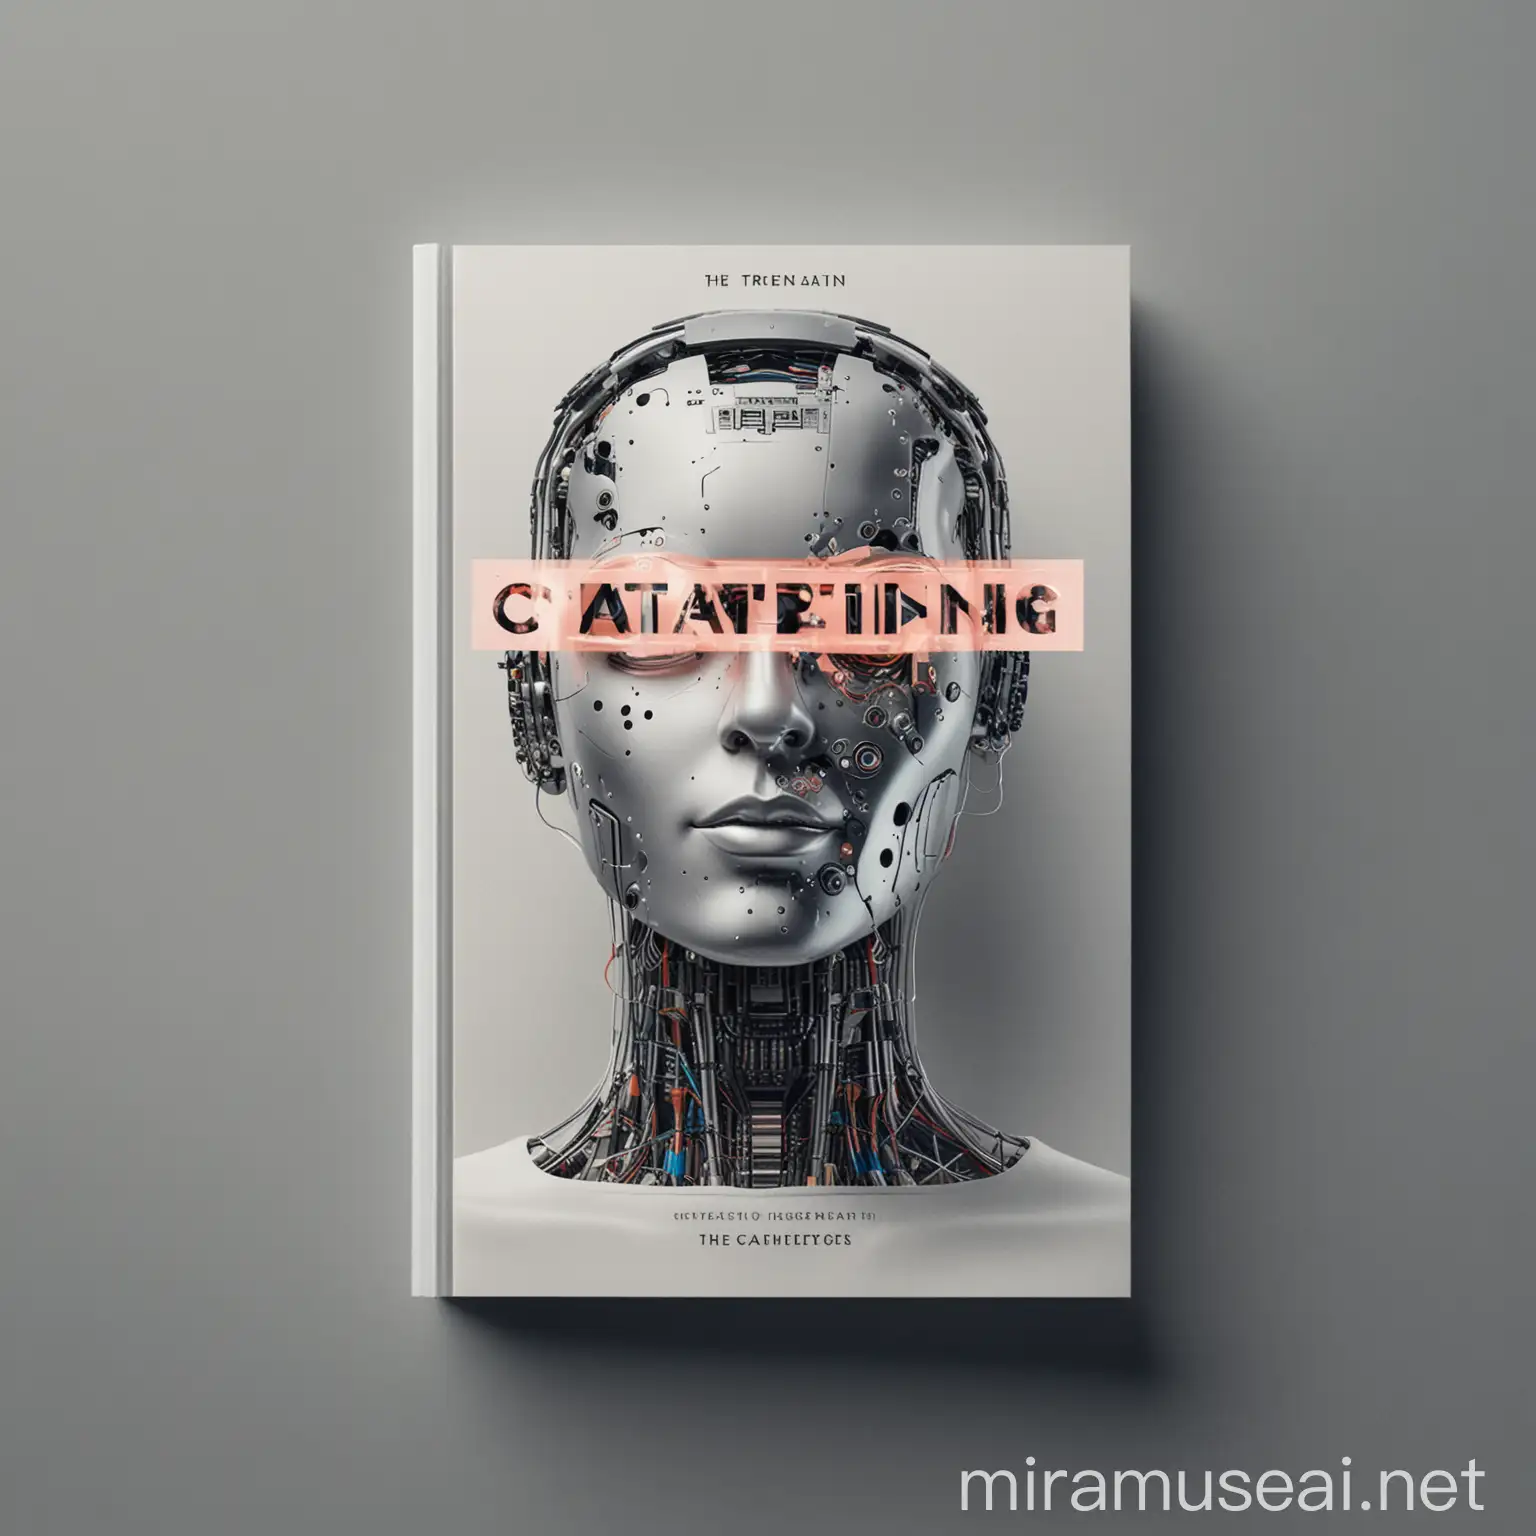 Captivating Trend Book Cover Photo AI Advertising Trends Illustrated